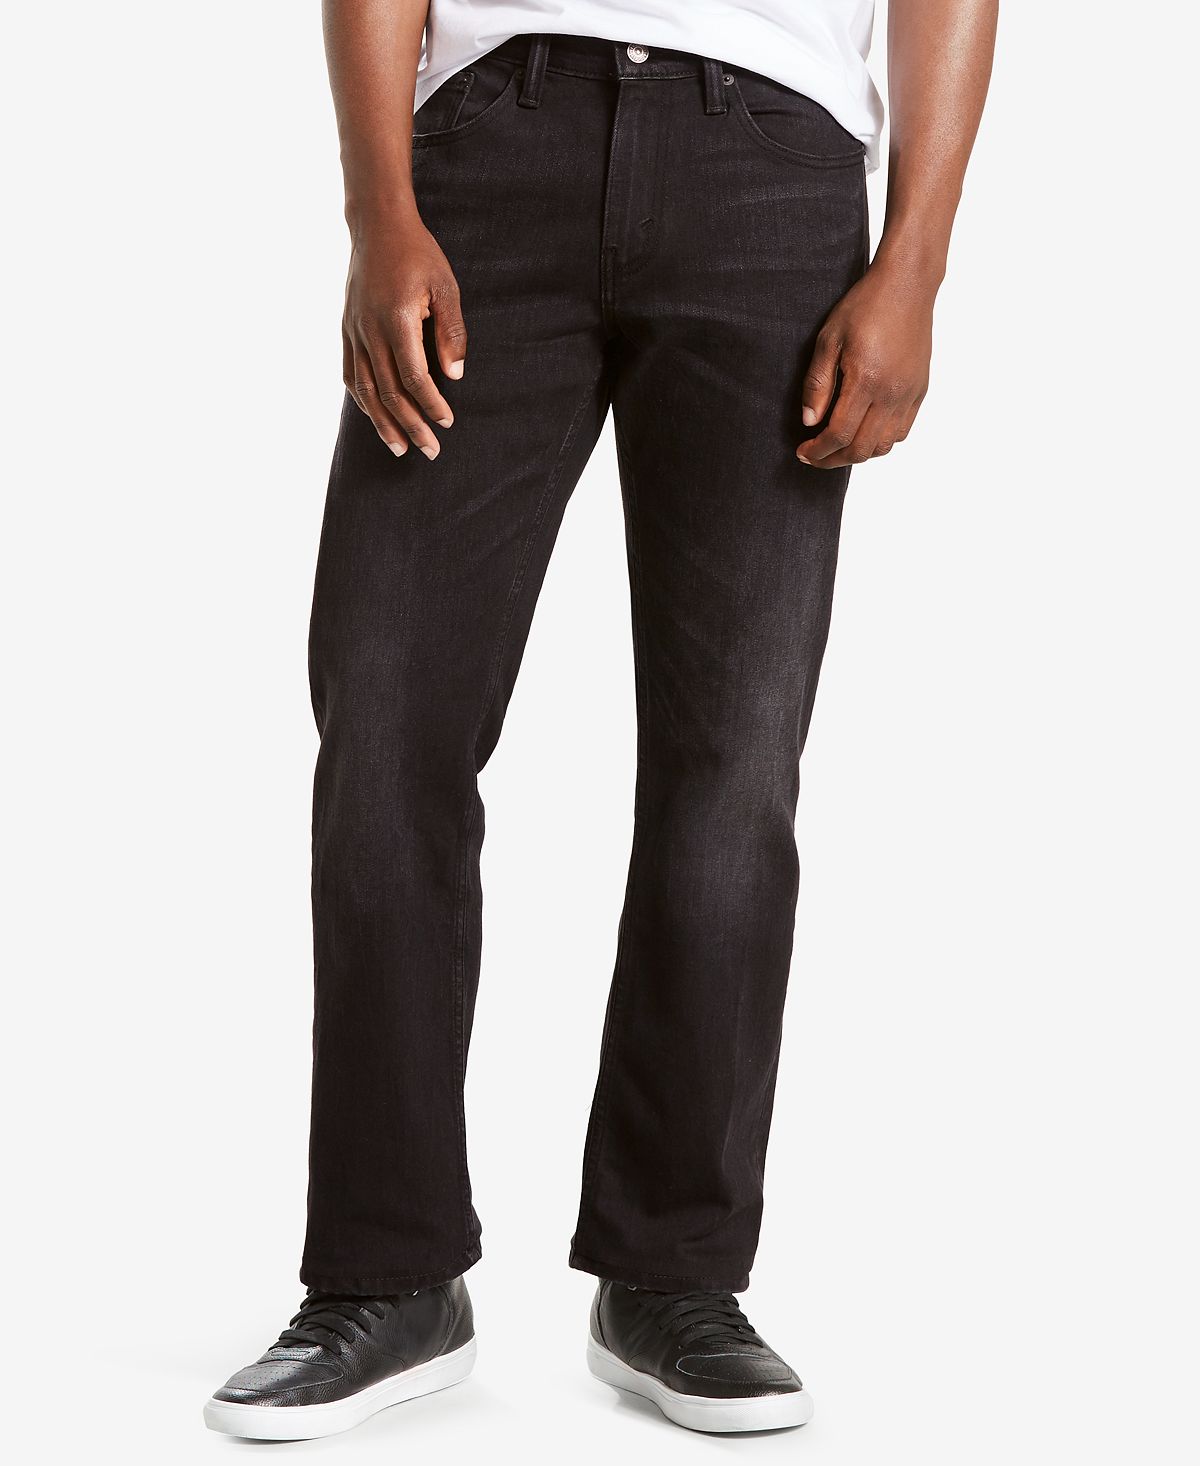 Levi's 559™ Relaxed Straight Fit Jeans Avenger - Waterless